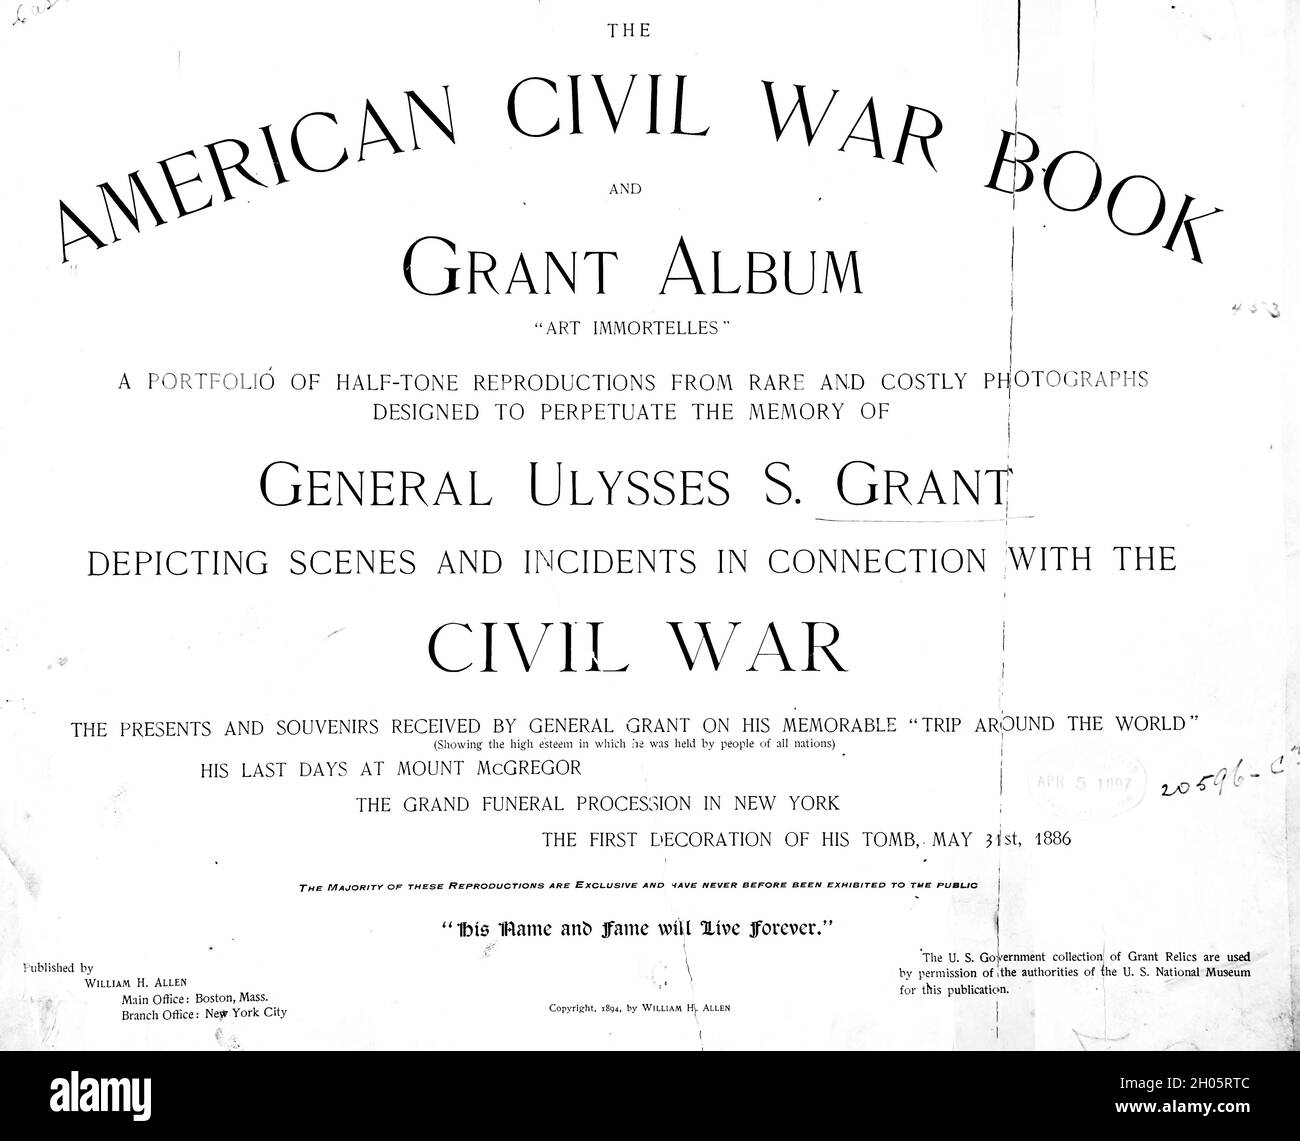 from The American Civil War book and Grant album : 'art immortelles' : a portfolio of half-tone reproductions from rare and costly photographs designed to perpetuate the memory of General Ulysses S. Grant, depicting scenes and incidents in connection with the Civil War Published  in Boston and New York by W. H. Allen in 1894 Stock Photo